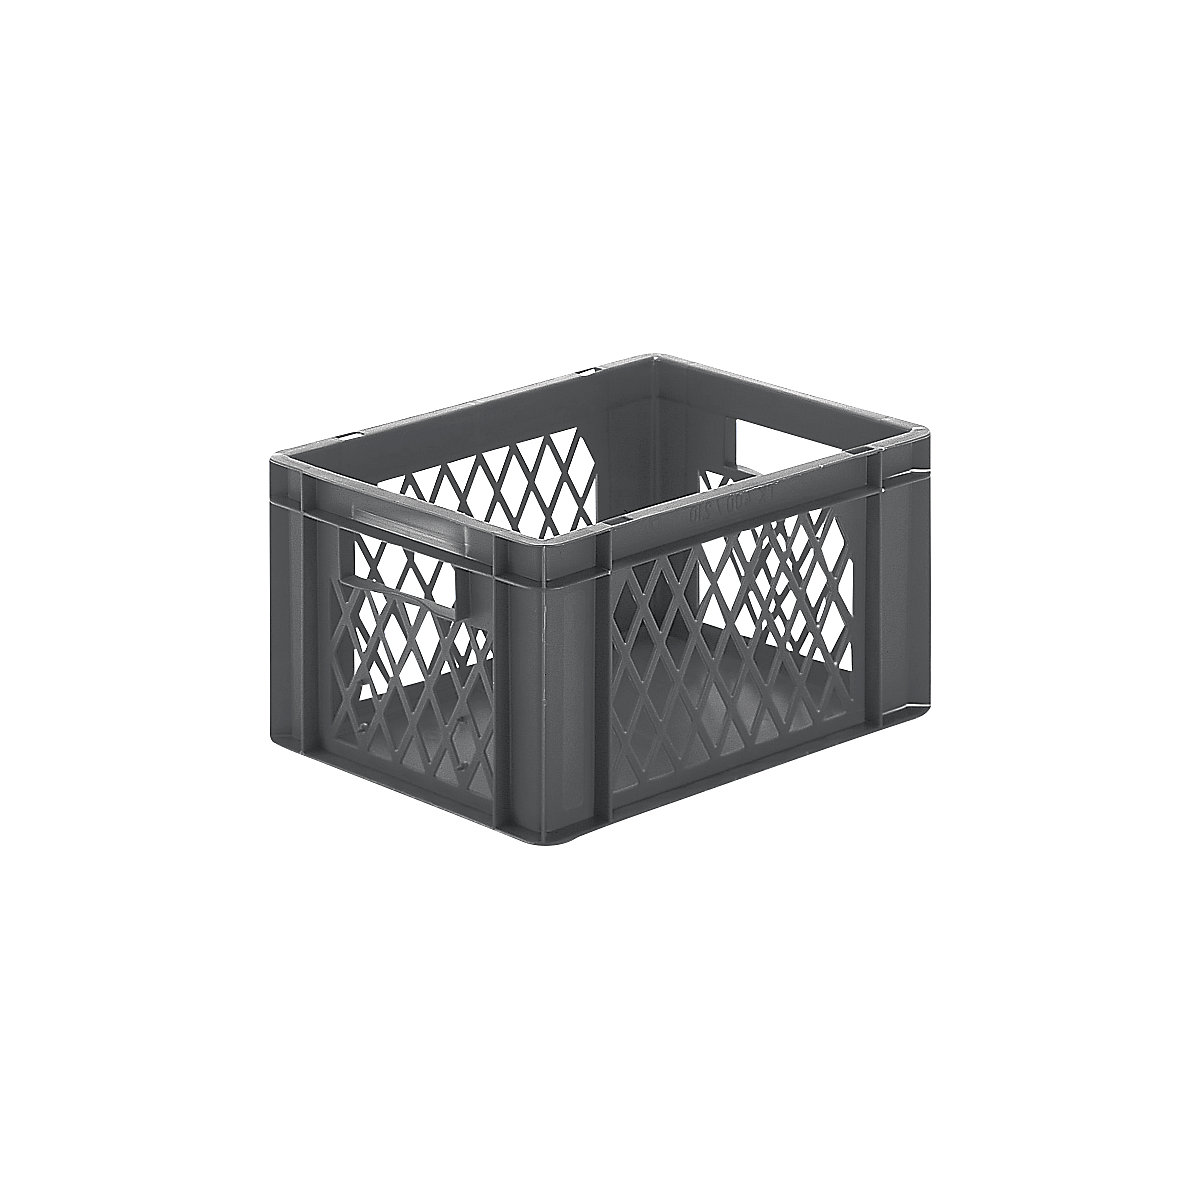 Euro stacking container, perforated walls, closed base, LxWxH 400 x 300 x 210 mm, grey, pack of 5-7